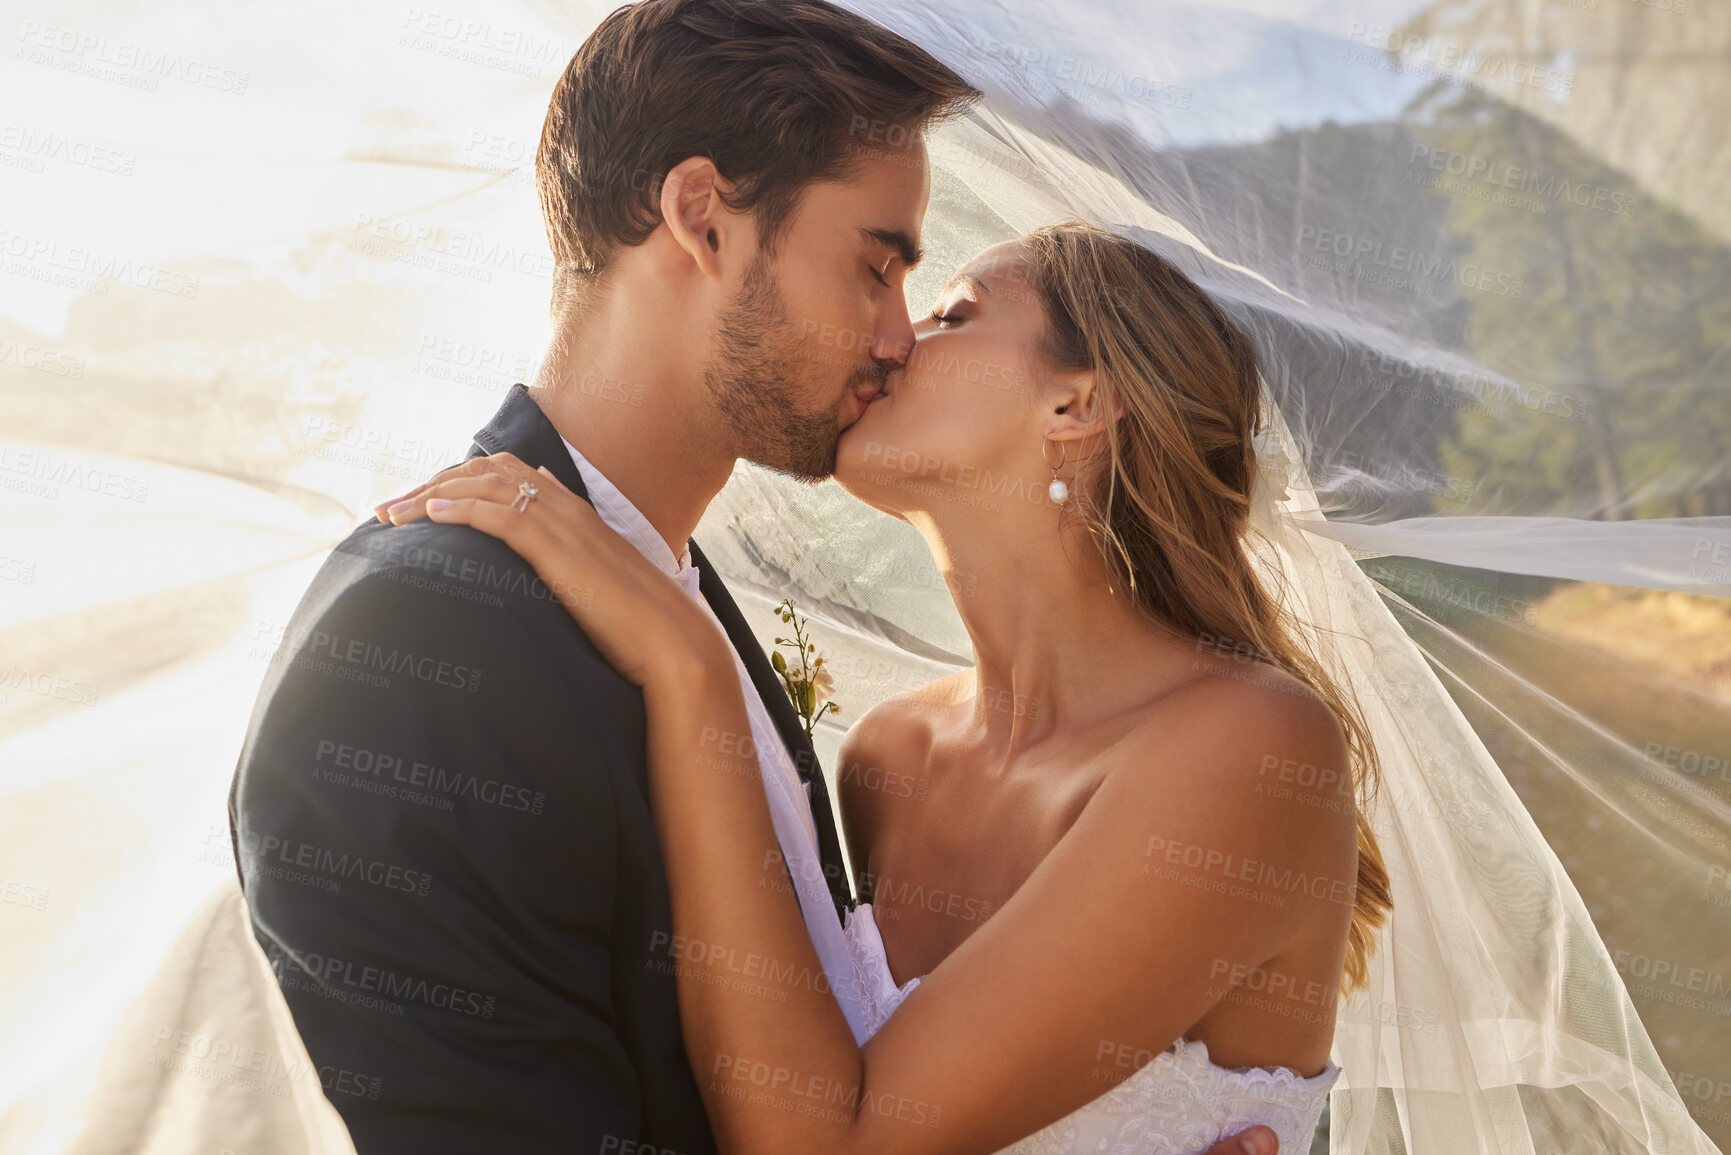 Buy stock photo Couple, wedding and kissing with vail for love, compassion or affection together in nature. Married man kiss woman on lips, hugging in marriage, relationship or loving embrace for commitment outdoors